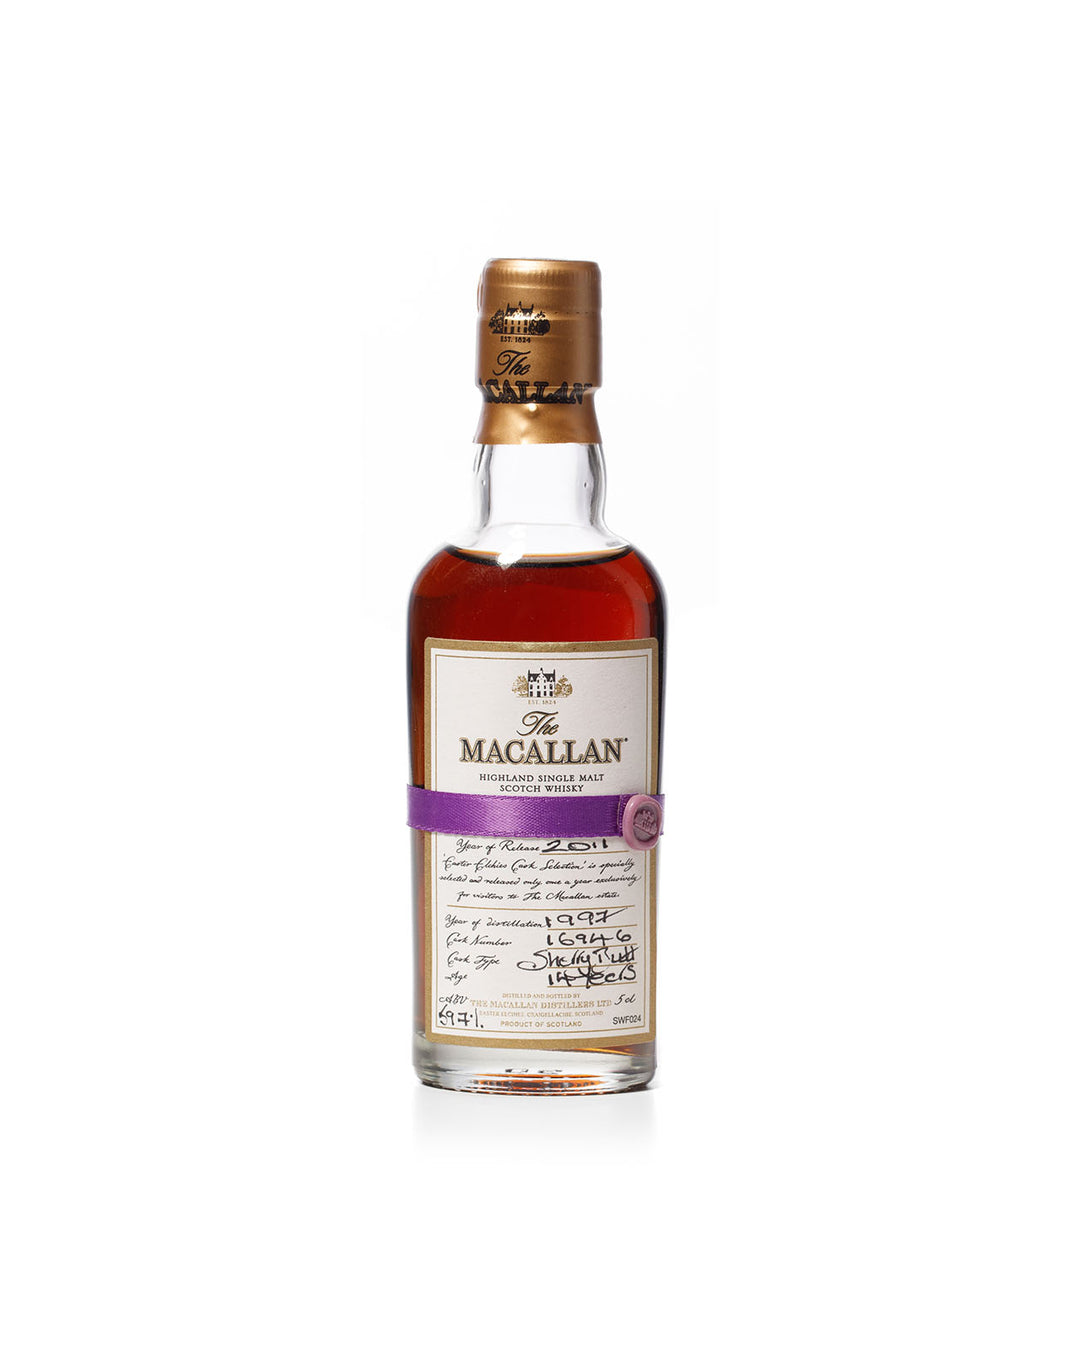 Macallan 1997 14 Year Old Easter Elchies Miniature Bottled 2011